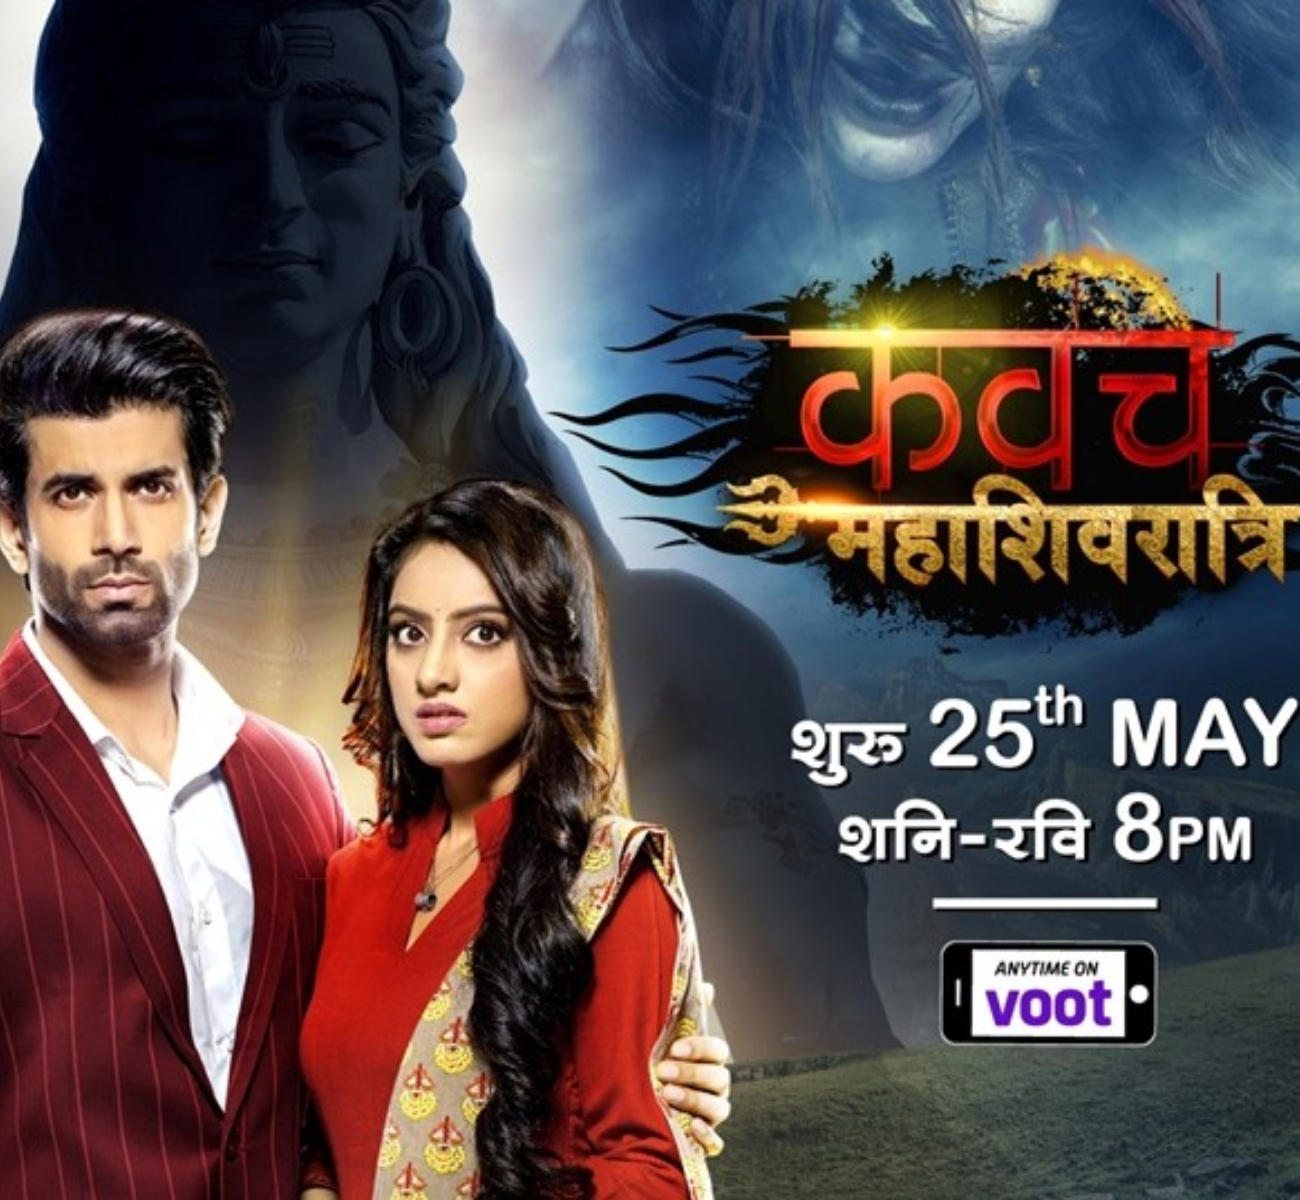 EXCLUSIVE: Namik Paul talks about Kavach Mahashivratri's staggering TRPs, taking Naagin 3's slot & more